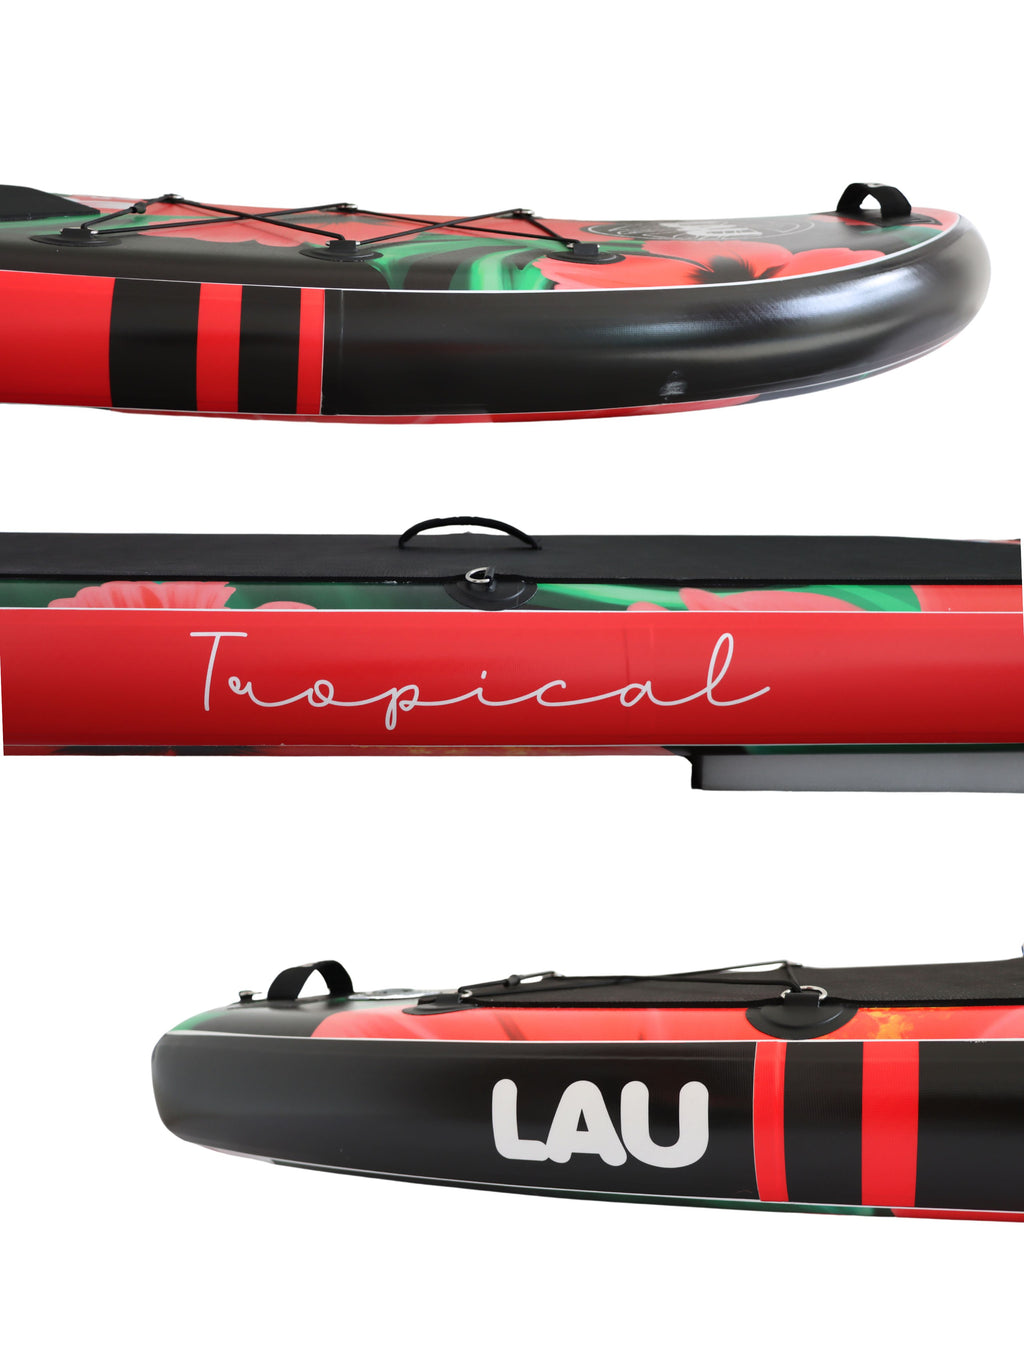 Tropical- 9'2 All-around- Paddle board gonflable